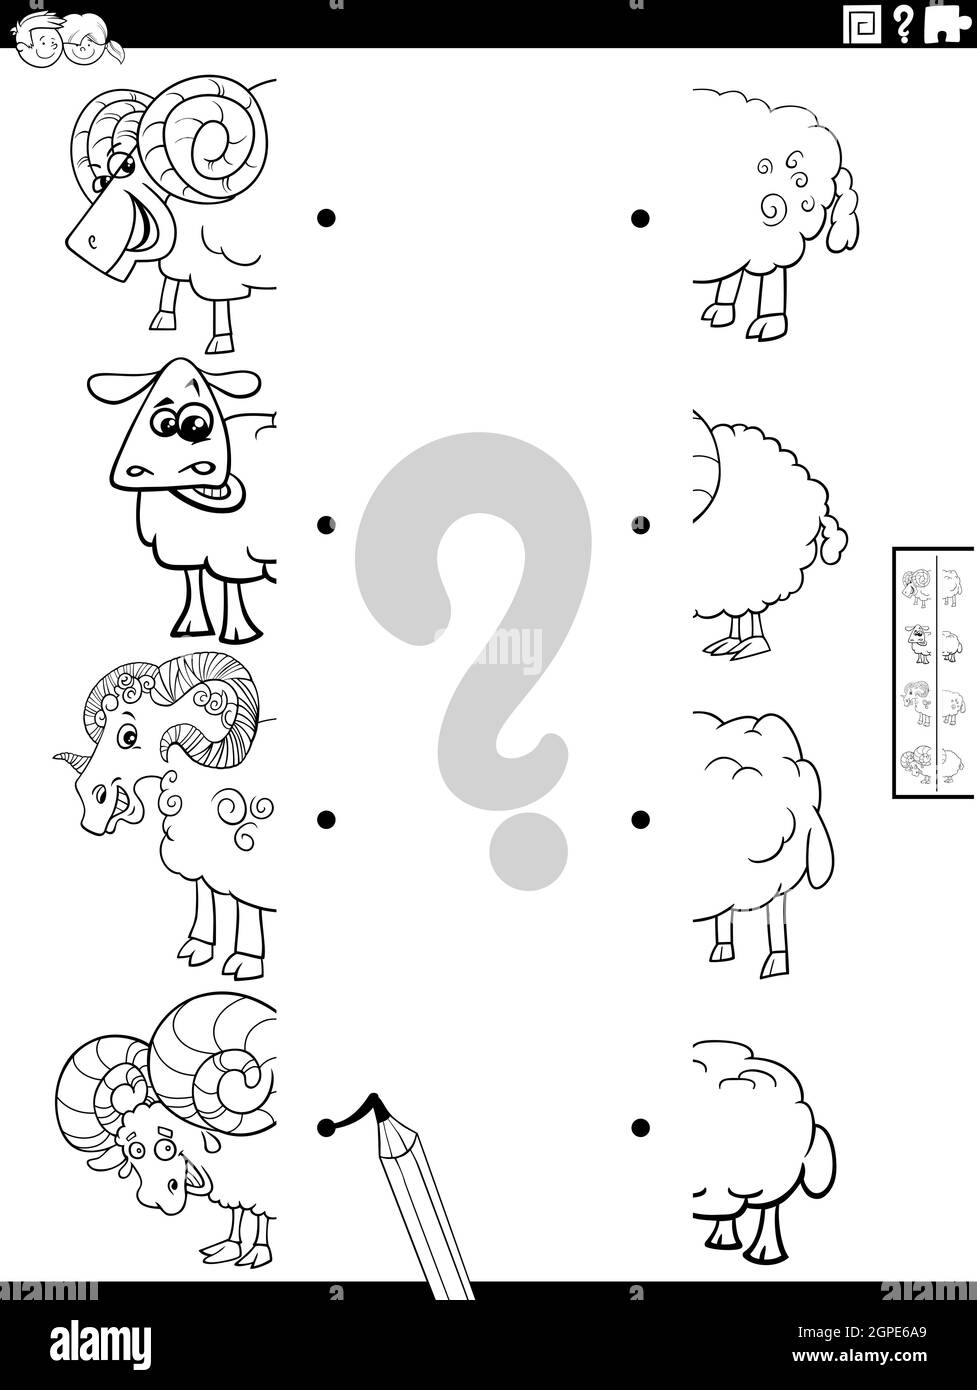 match halves of cartoon sheep pictures coloring book page Stock Vector